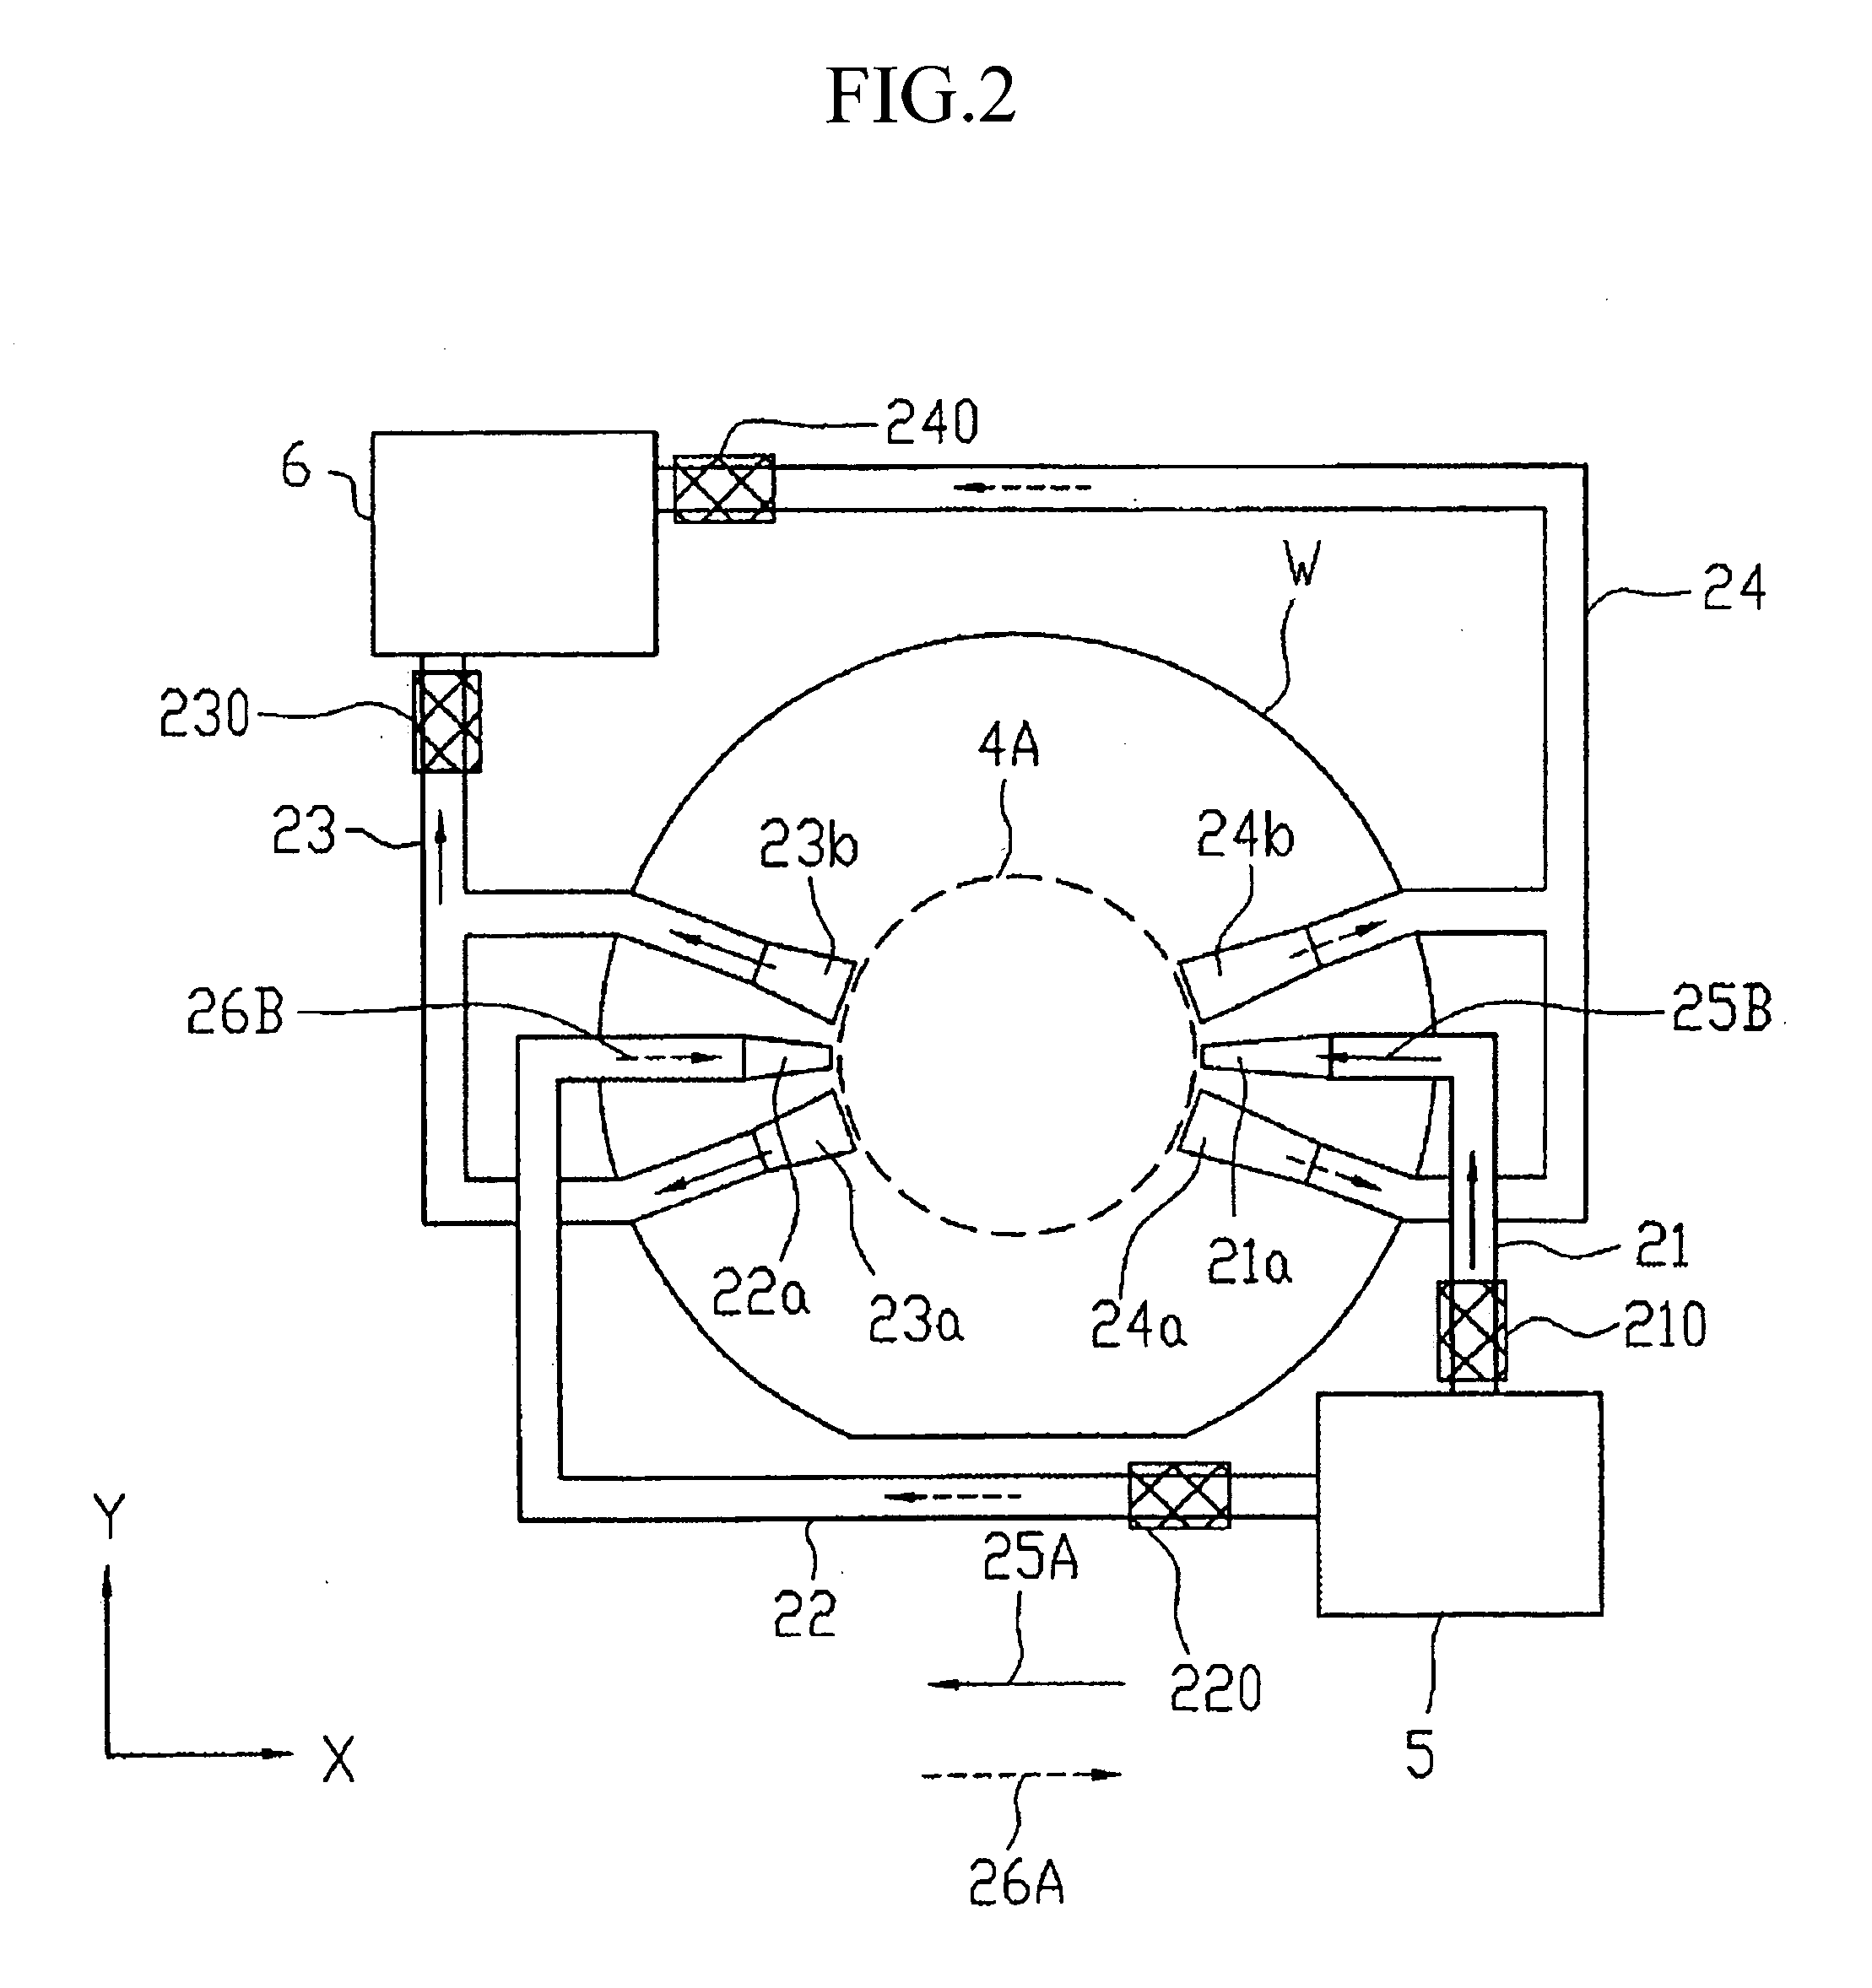 Projection exposure apparatus, cleaning and maintenance methods of a projection exposure apparatus, and device manufacturing method